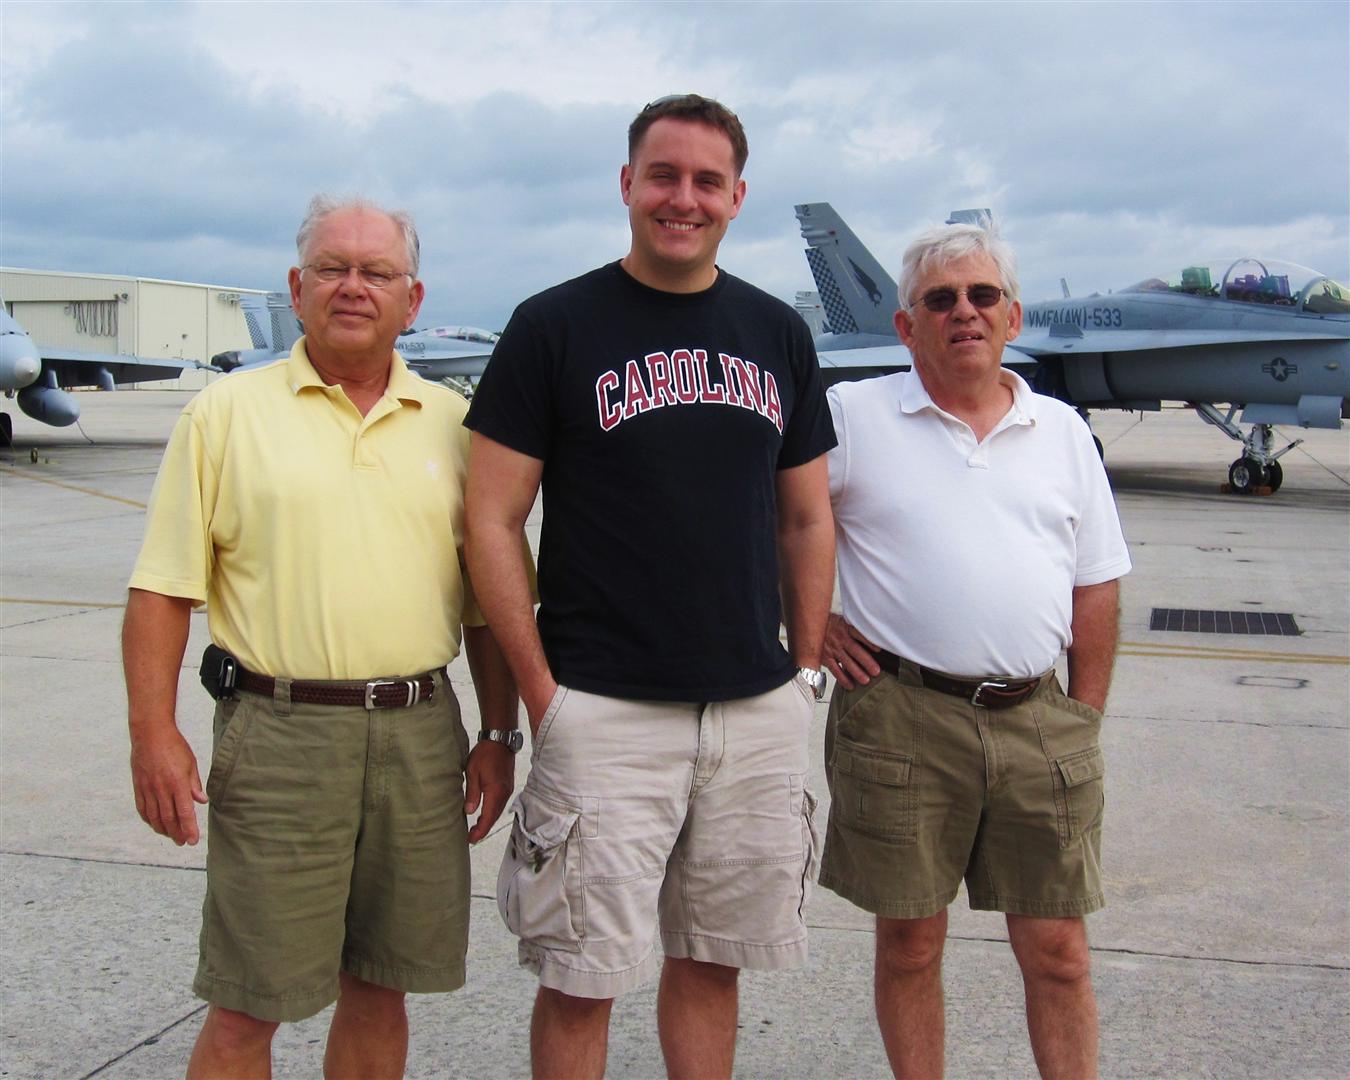 Getting a quick tour from a younger fraternity brother and F-18 pilot at MCAS, Beaufort